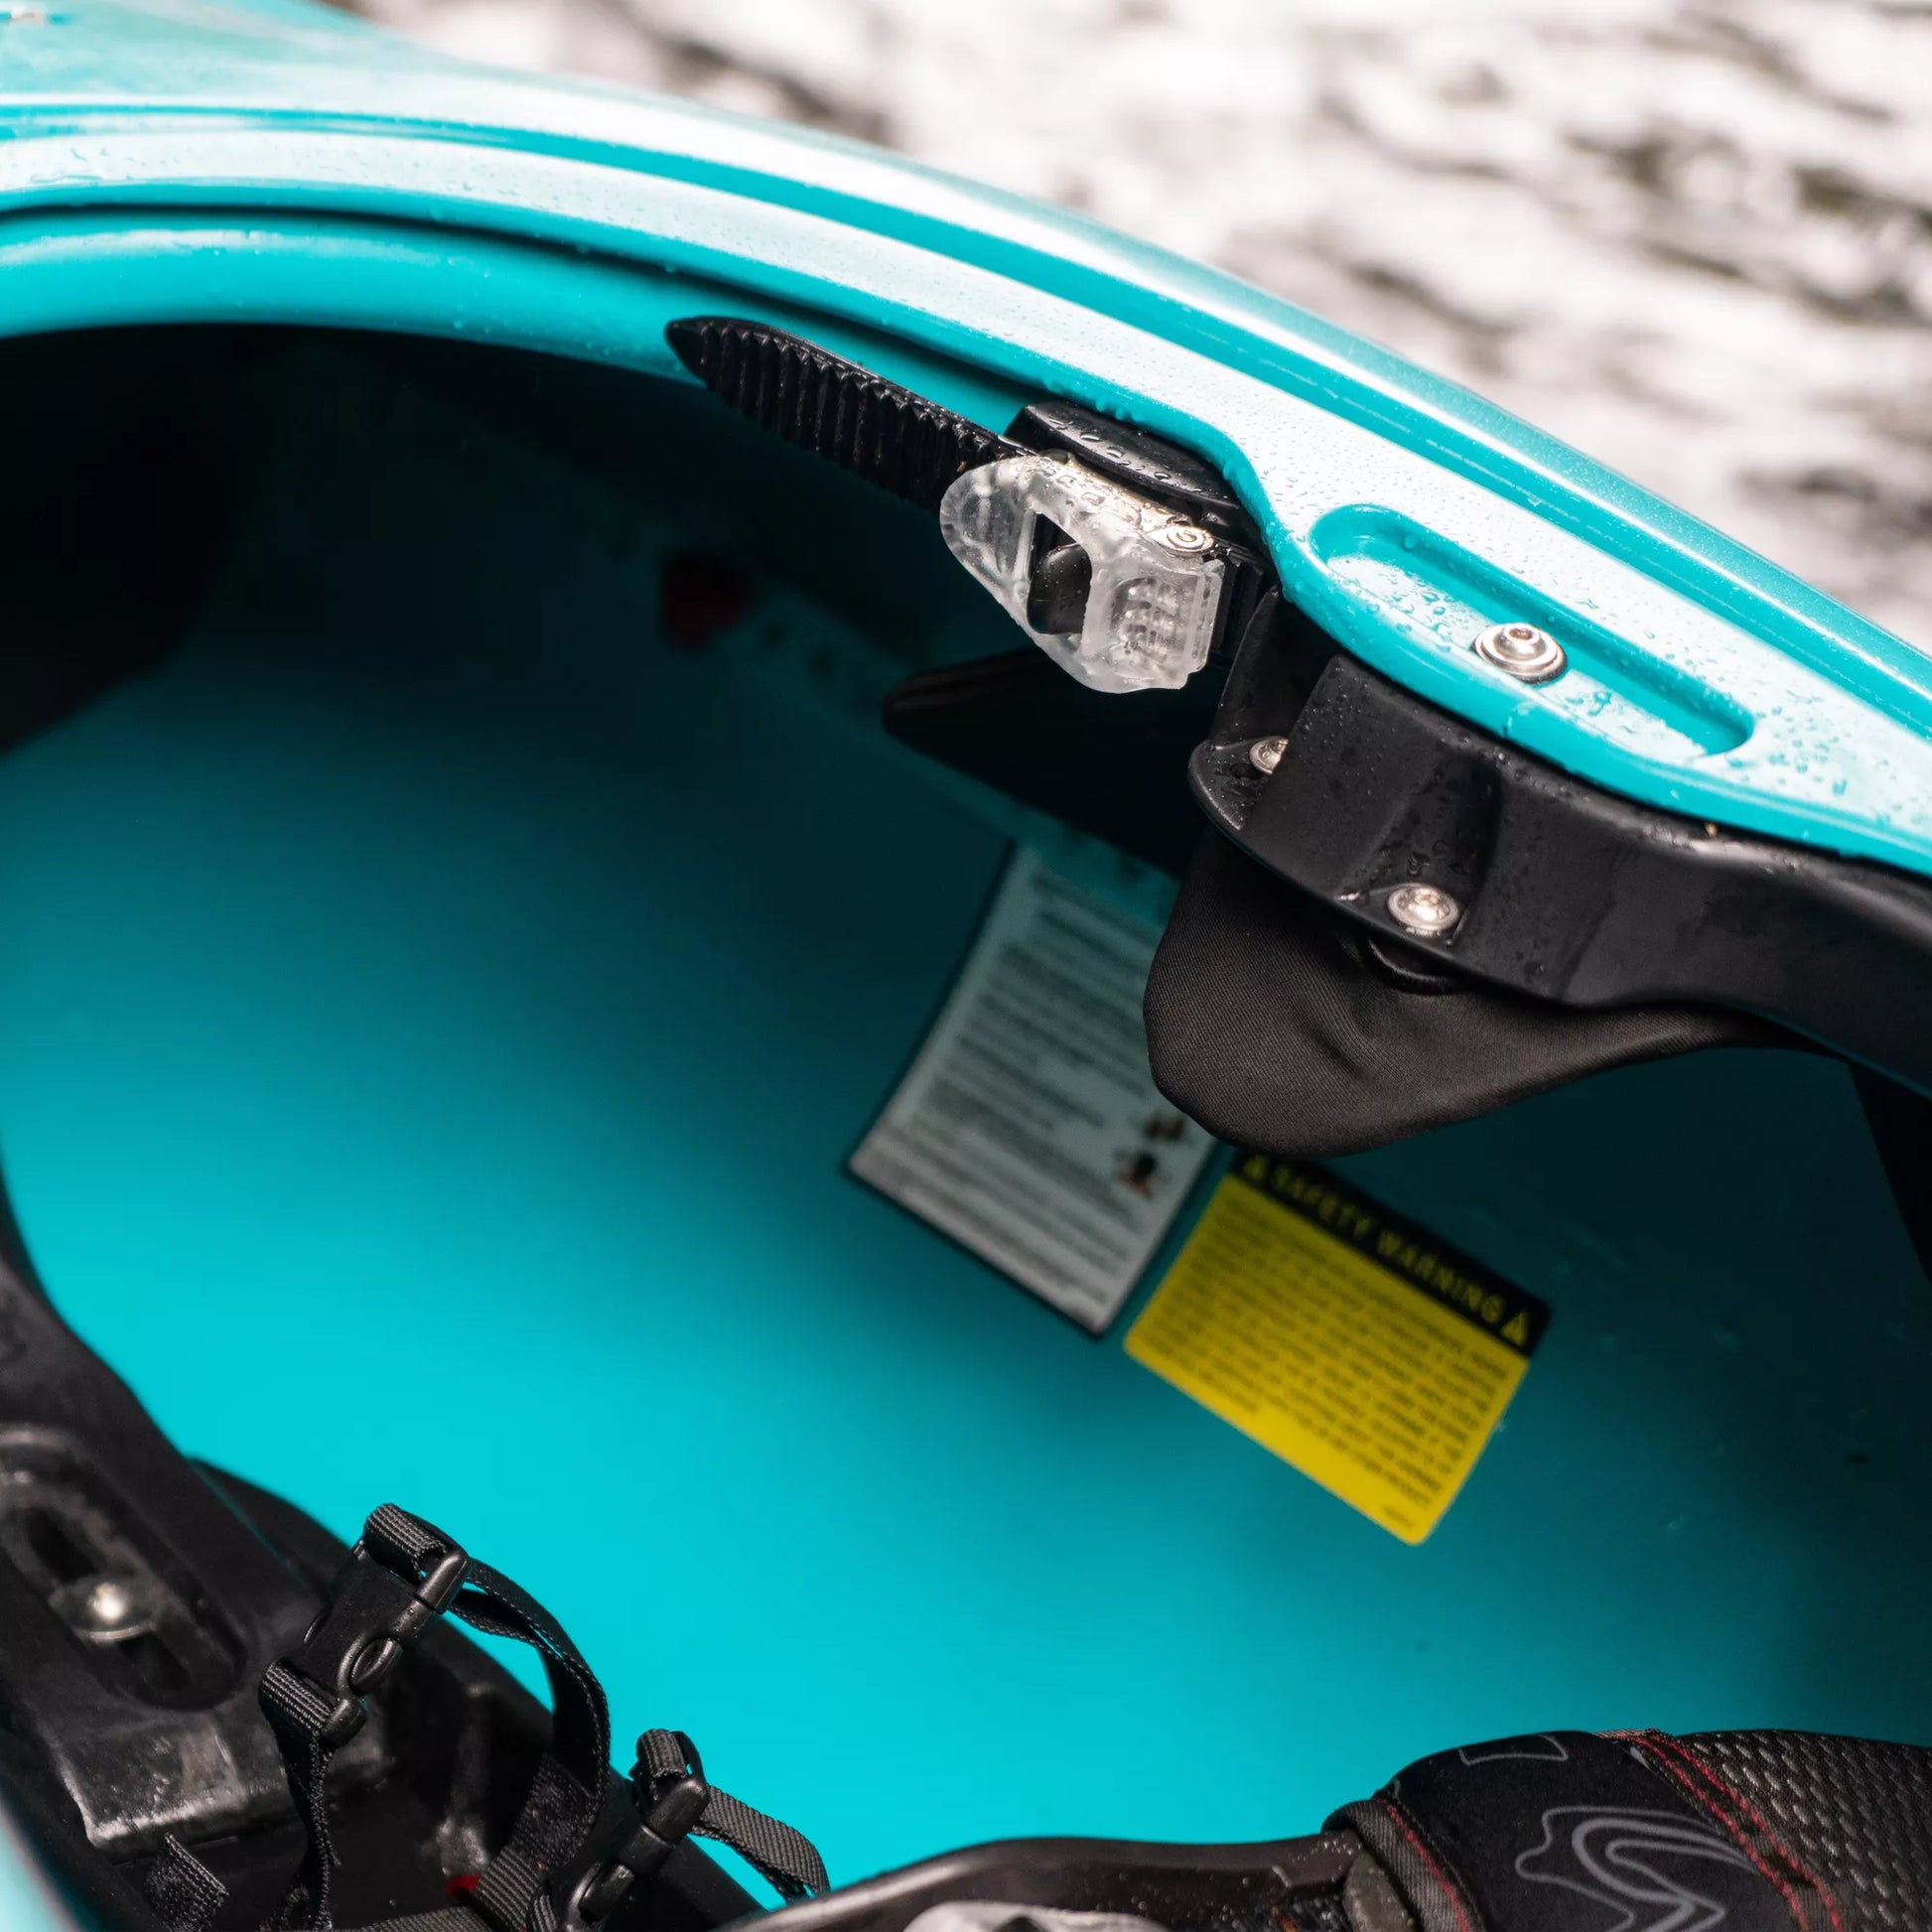 Close-up view of a Dagger Katana whitewater kayak cockpit with safety labels and adjustable foot pedals.